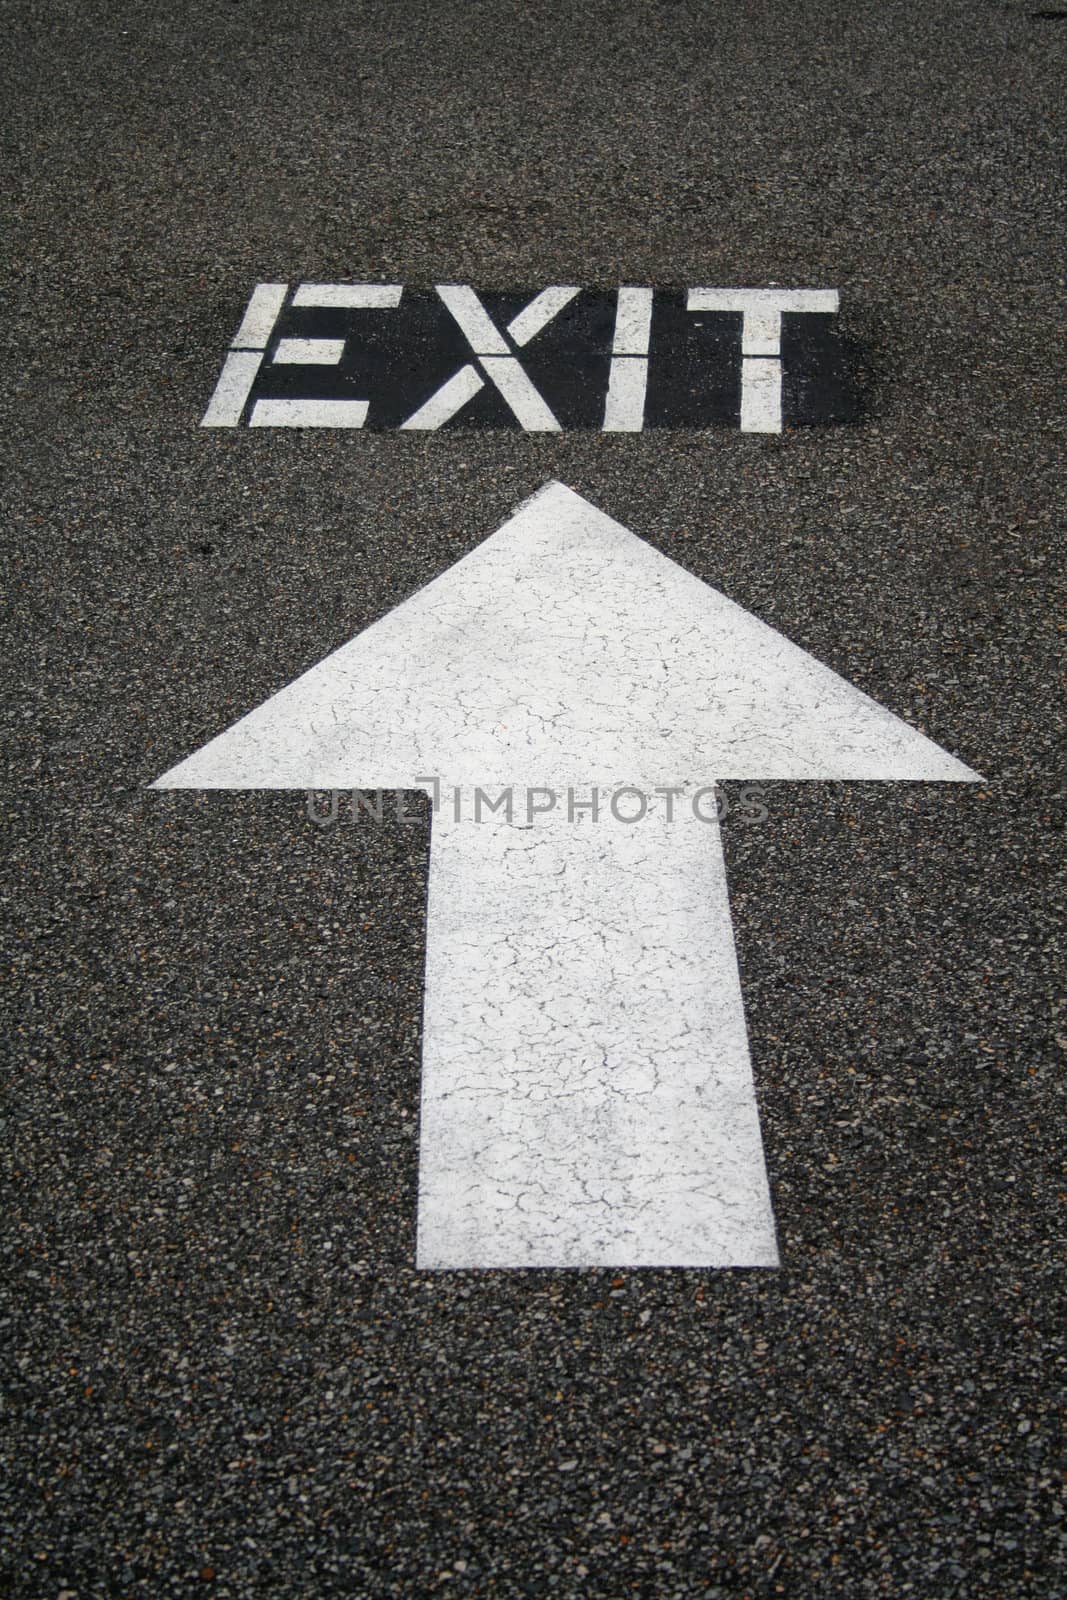 an arrow with the word exit

